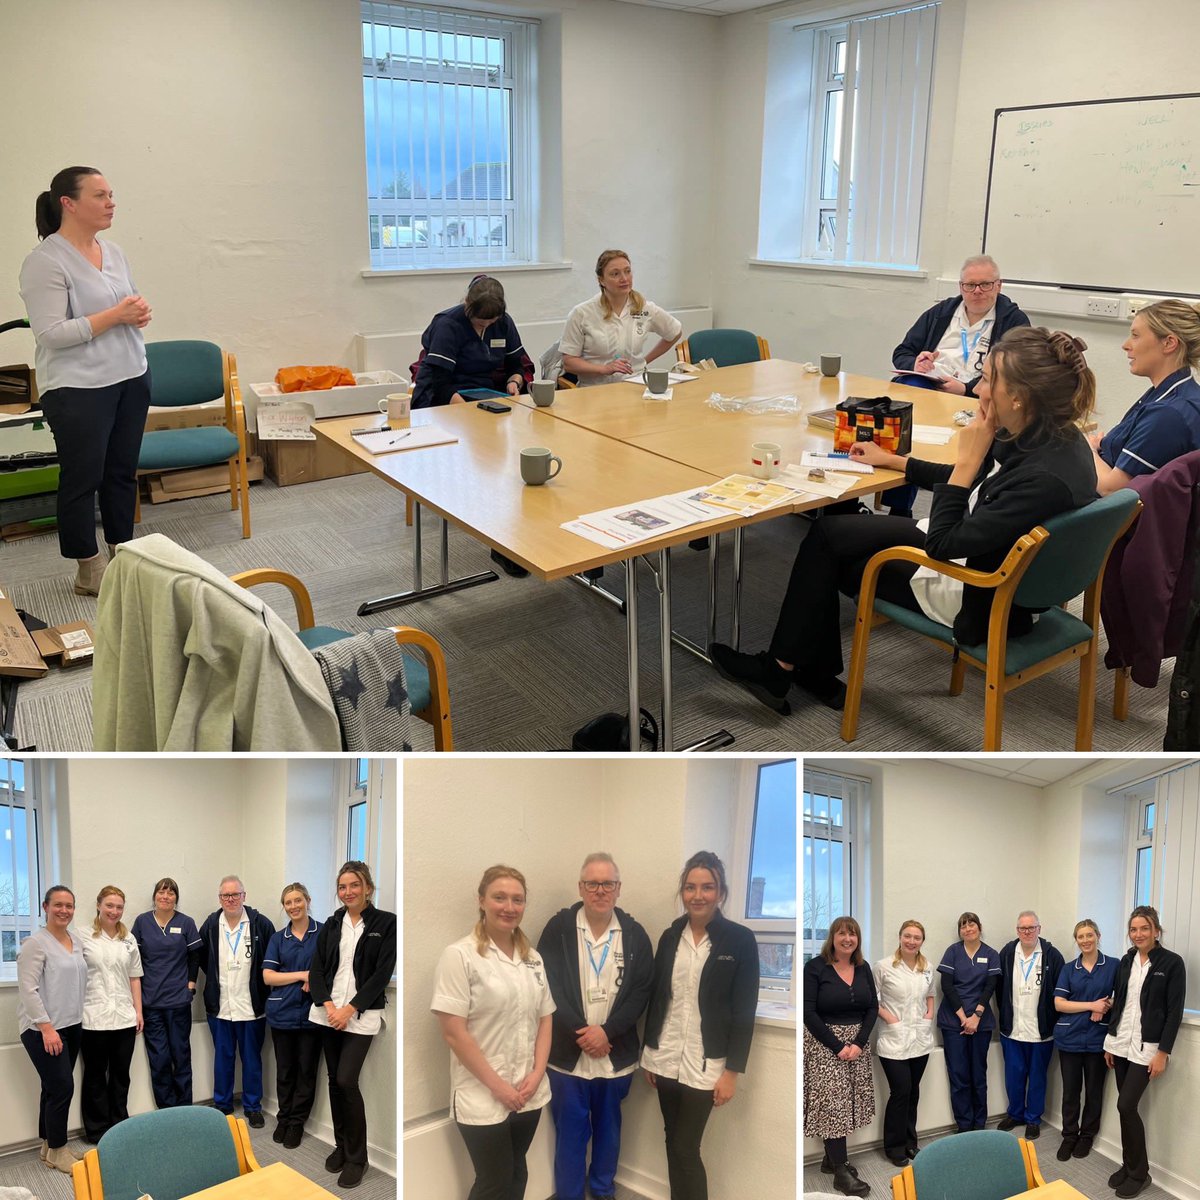 A great start to the first North Cumbria PCN student led placement pilot @healthncumbria Lots of great ideas can’t wait to see how it develops 🙌🏻 @UocNursing @HelenLStainsby @Jen14353147 @barbarafoggo @clarahopscotch @claireizon #EELE #Students #primarycare